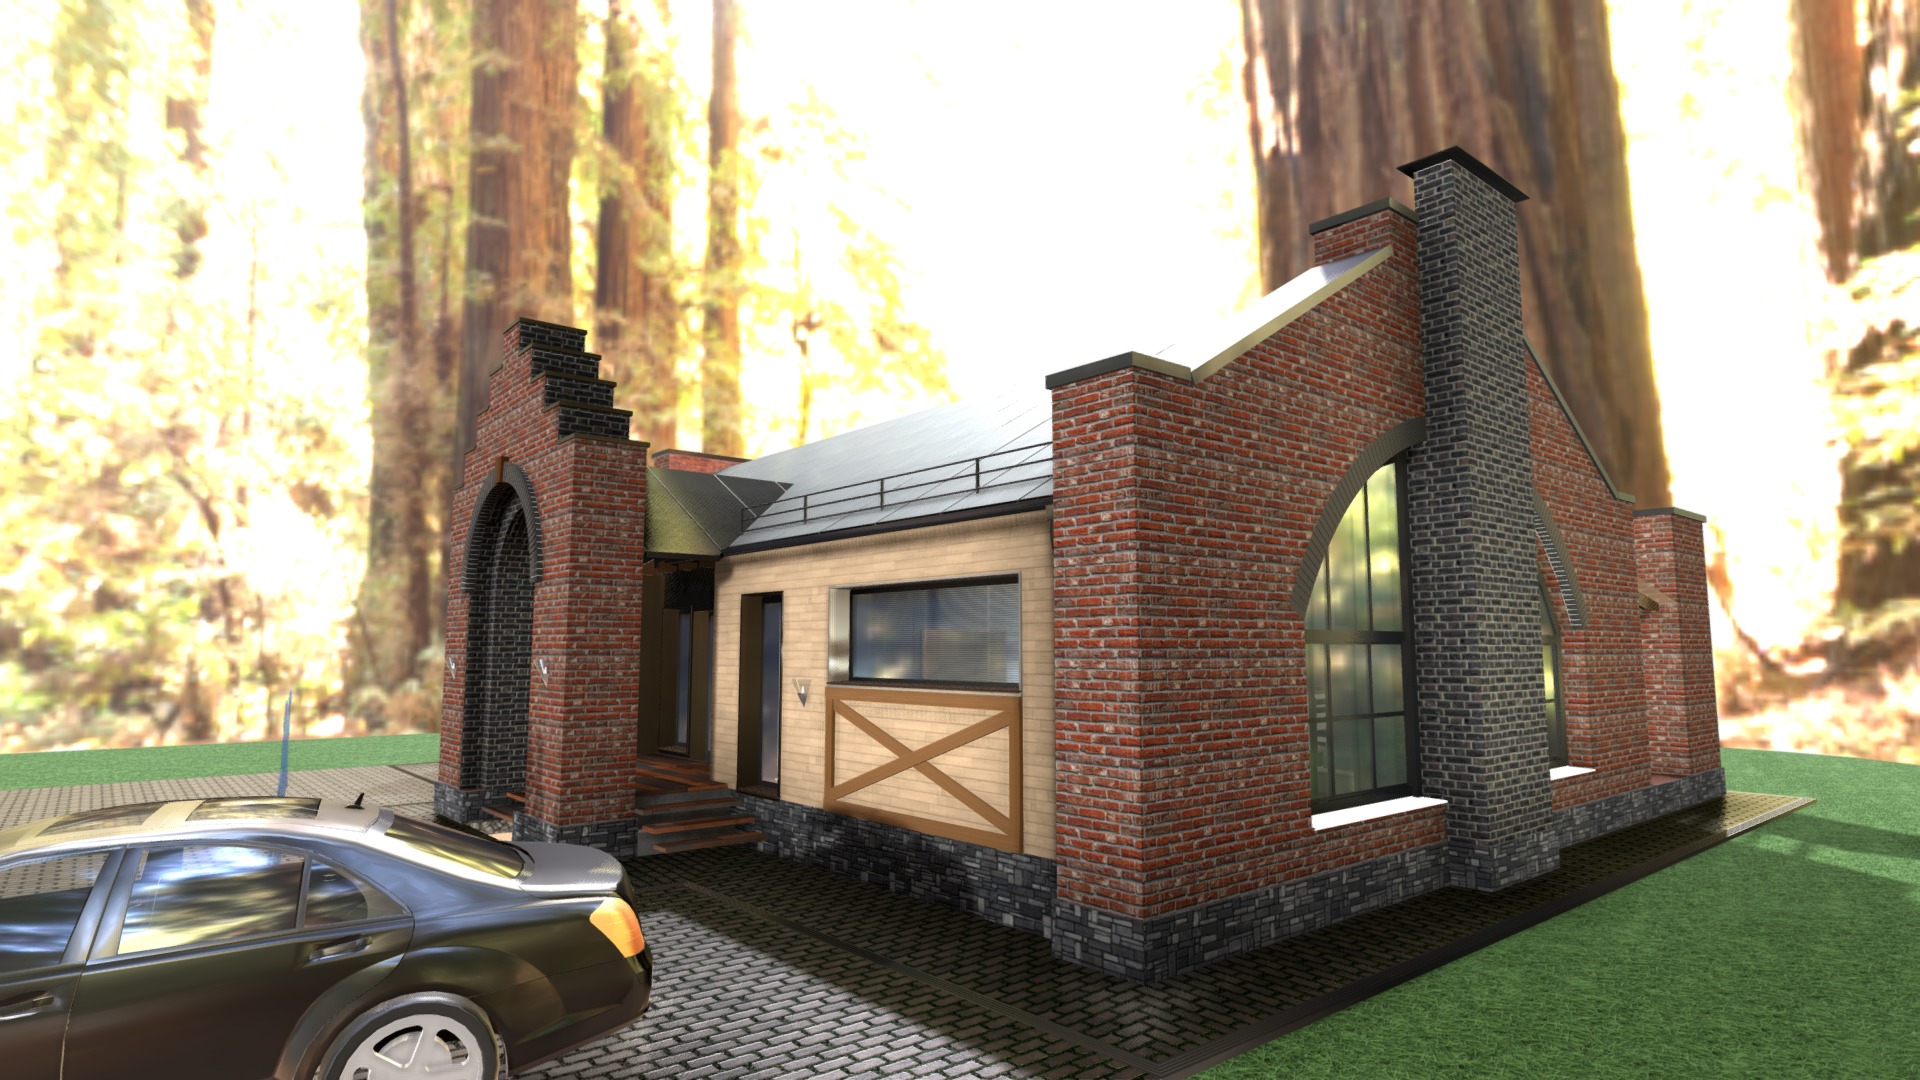 3D model Misterious House – walk inside - This is a 3D model of the Misterious House - walk inside. The 3D model is about a brick house with a car parked in front of it.